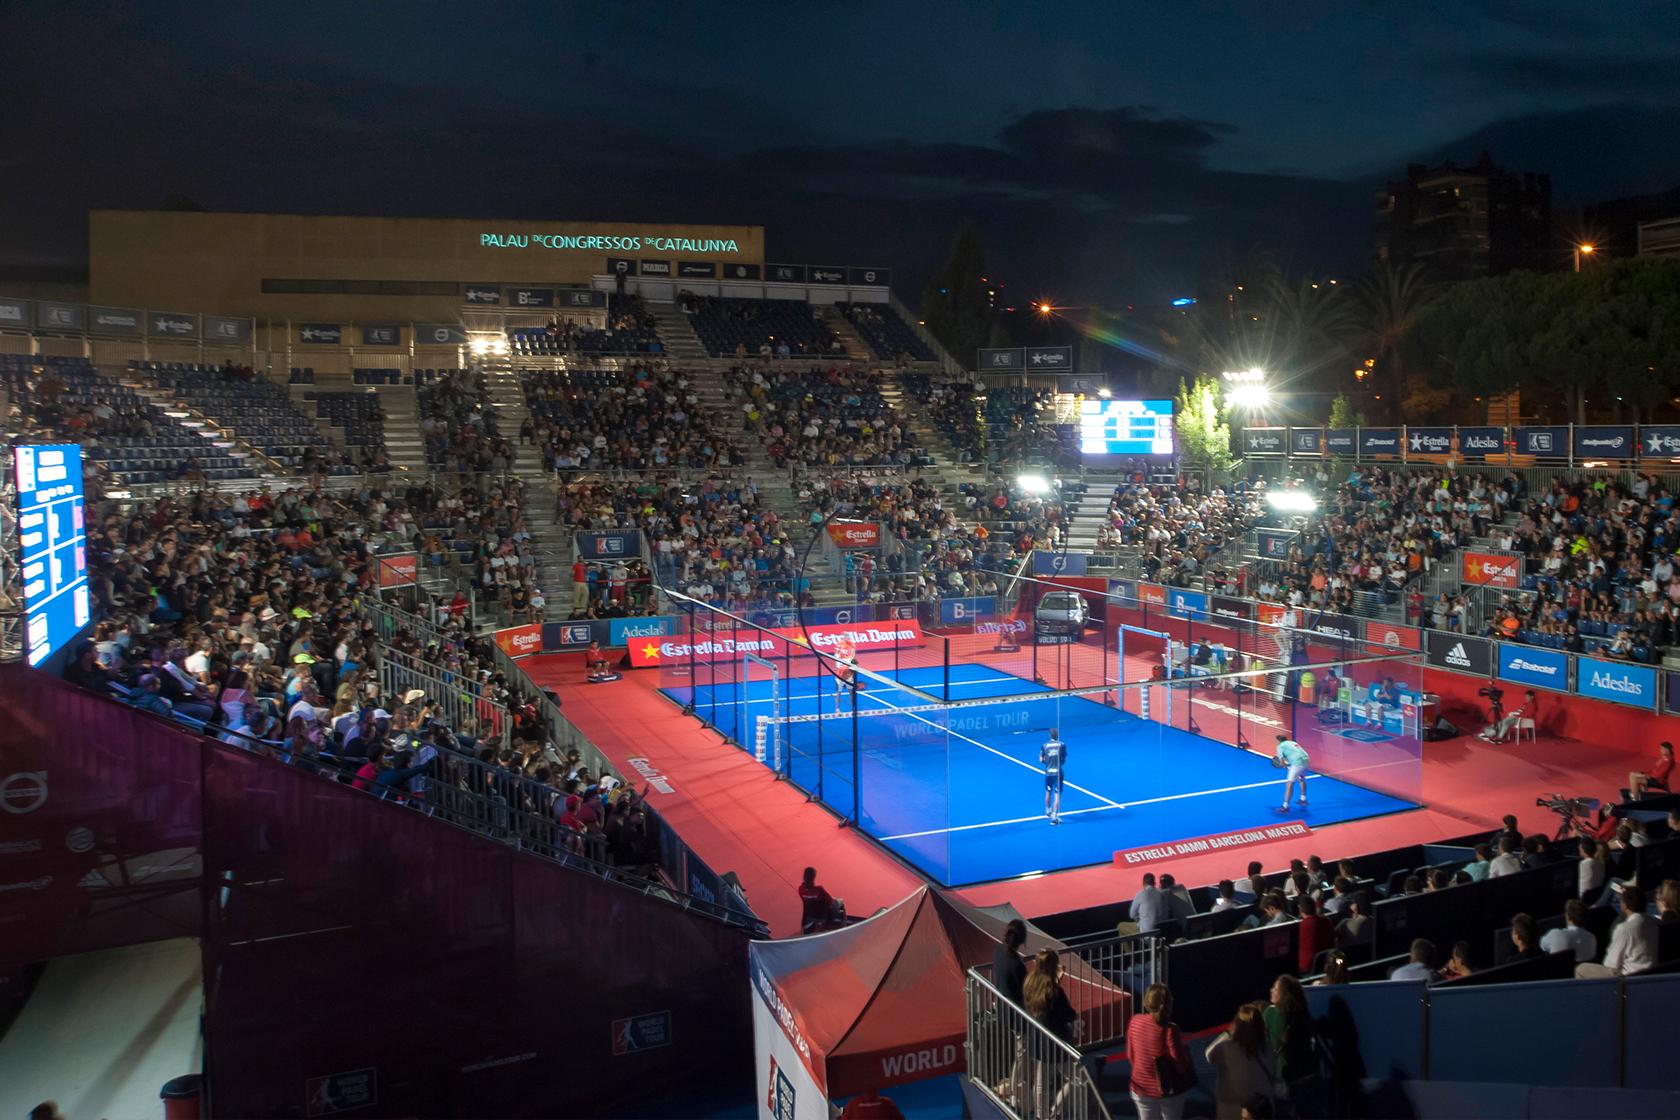 world padel tour brussels schedule